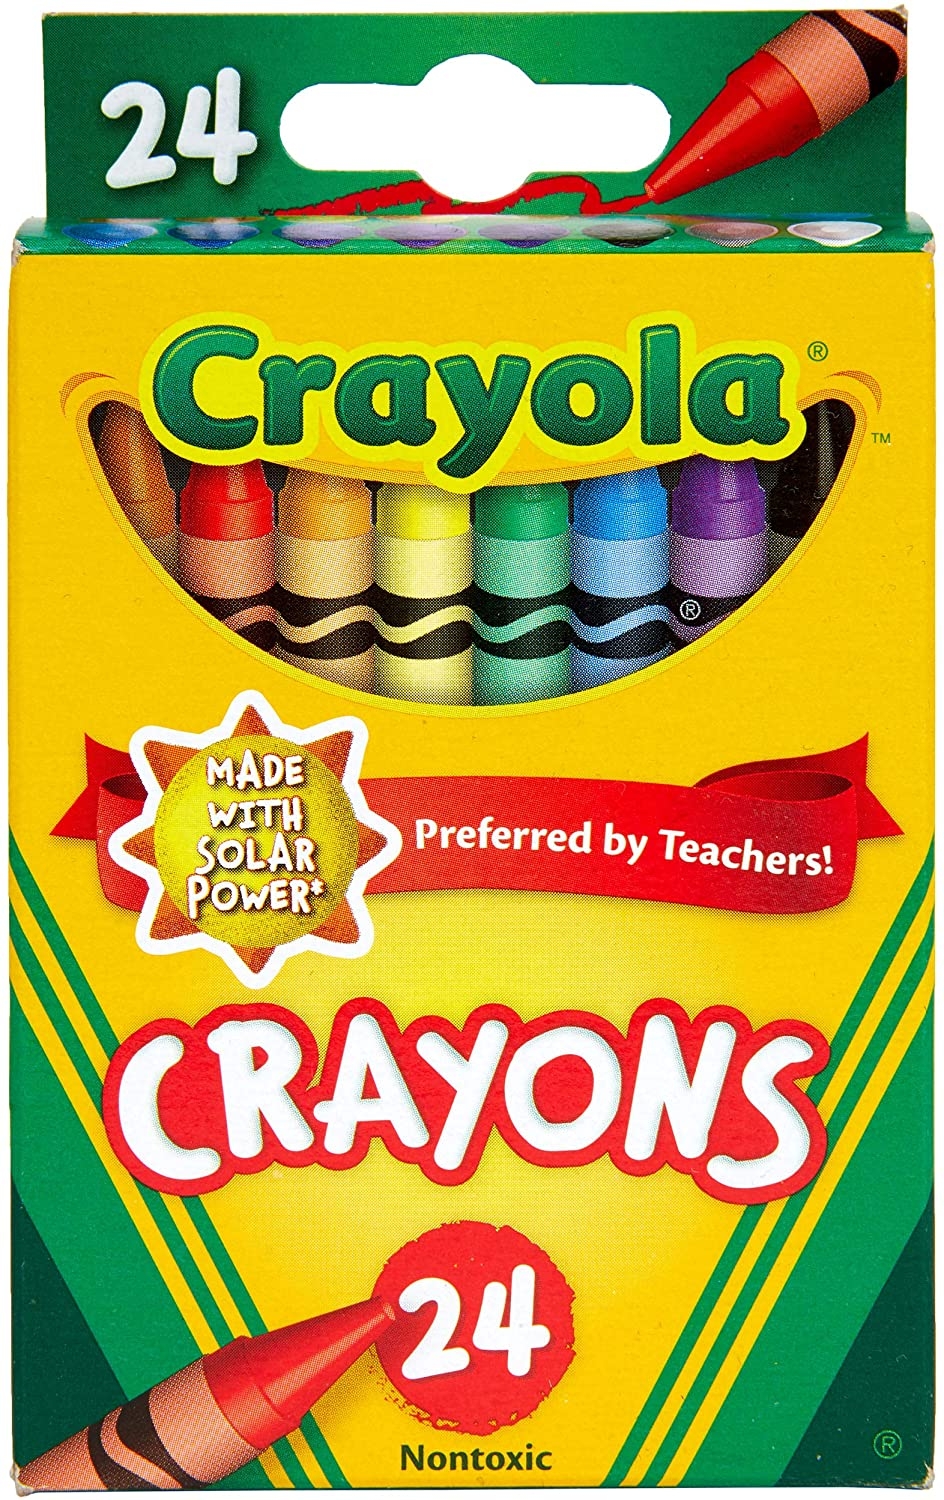  Crayons 24 Count - 4 Packs (52-3024) 96-Count : Toys & Games